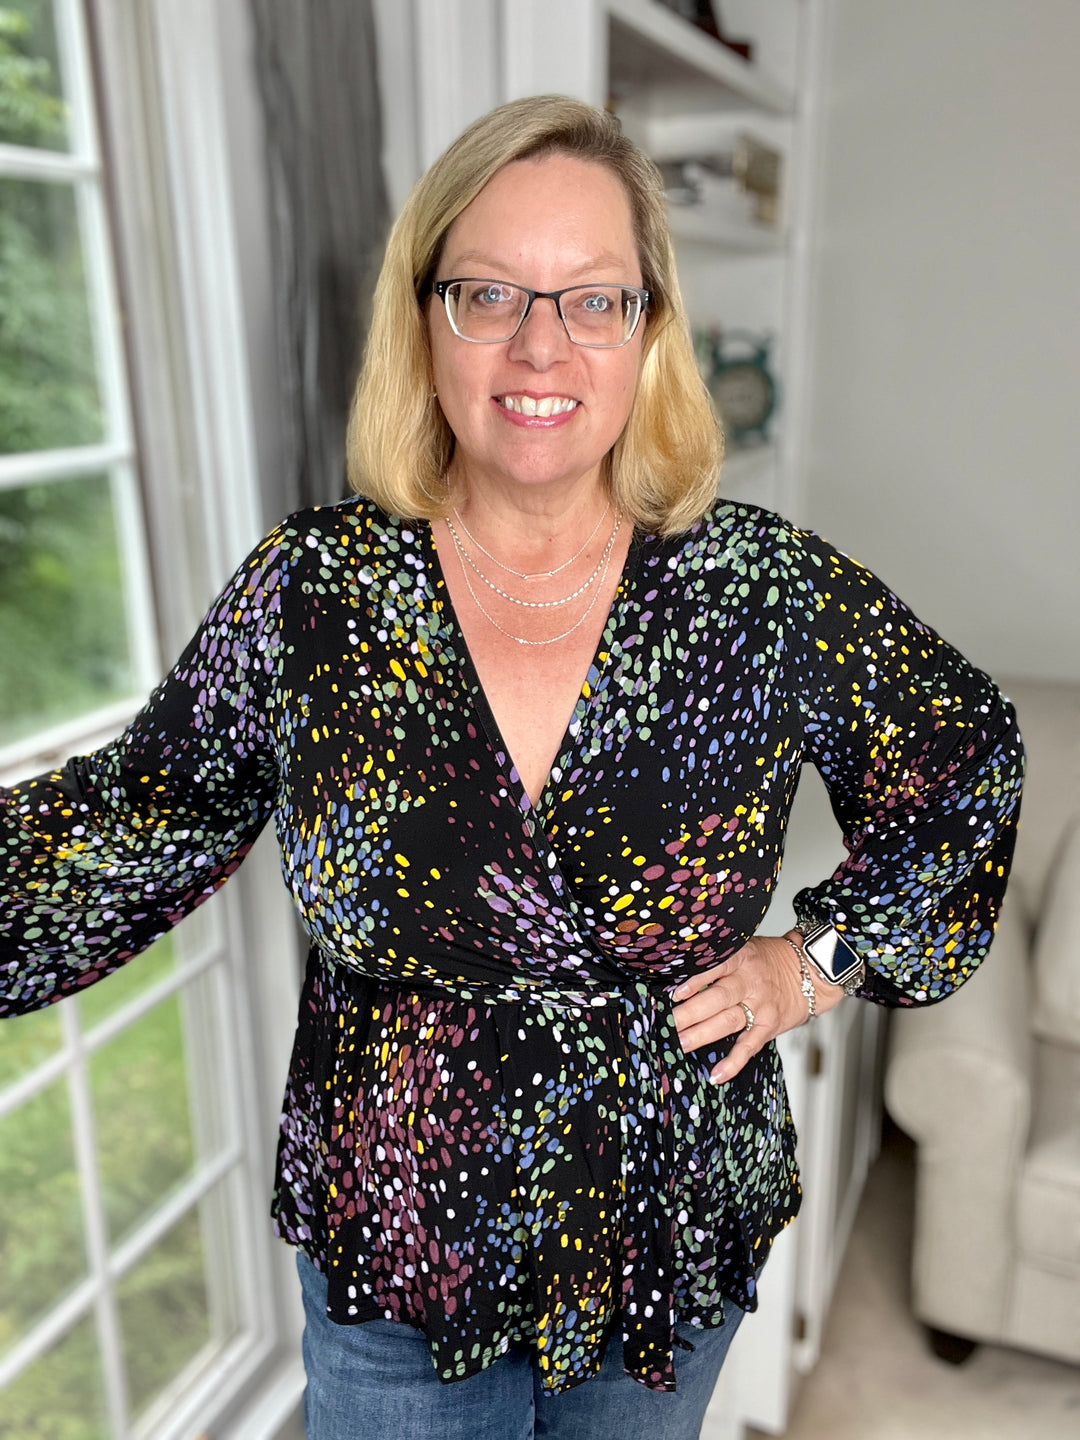 Multi-Color Surplice Blouse with Belt-Long Sleeve Tops-Styled by Steph-Styled by Steph-Women's Fashion Clothing Boutique, Indiana